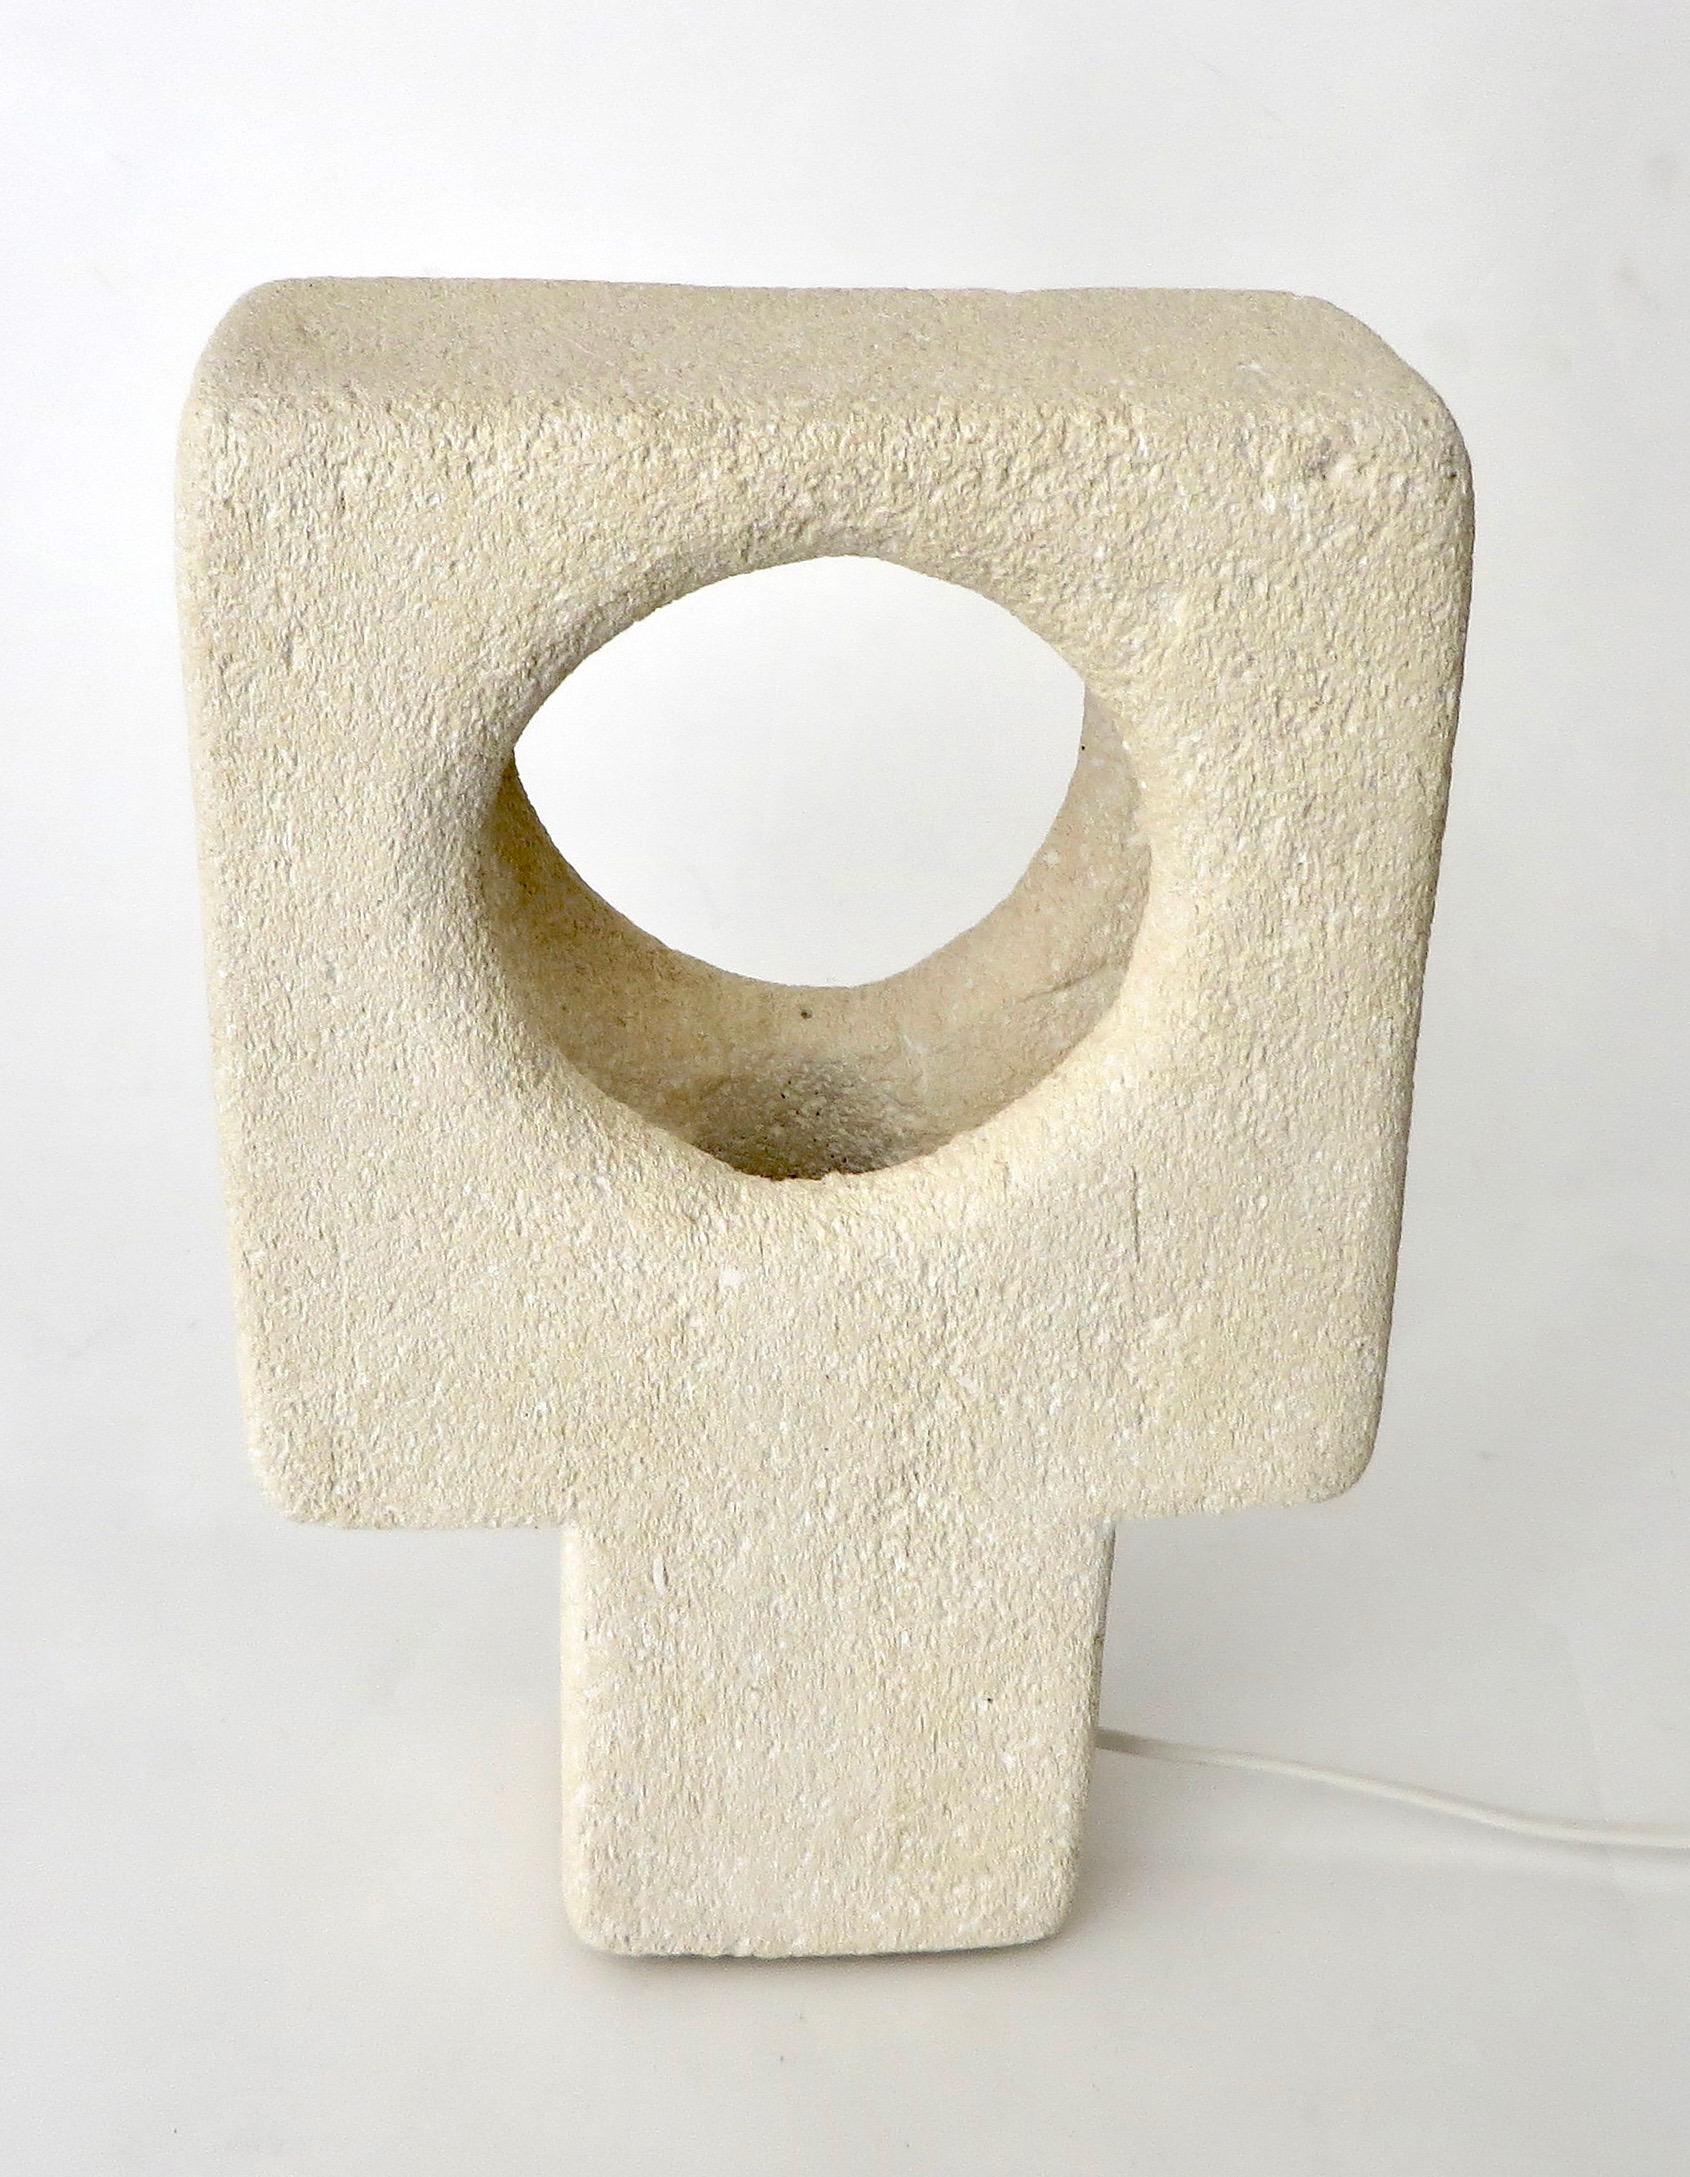 Hand carved French volcanic luberon limestone or tuff stone lamp with a Minimalist beton-brut architectural bearing.
By Vallauris artist Albert Tormos, made circa 1970s. Incised signature 